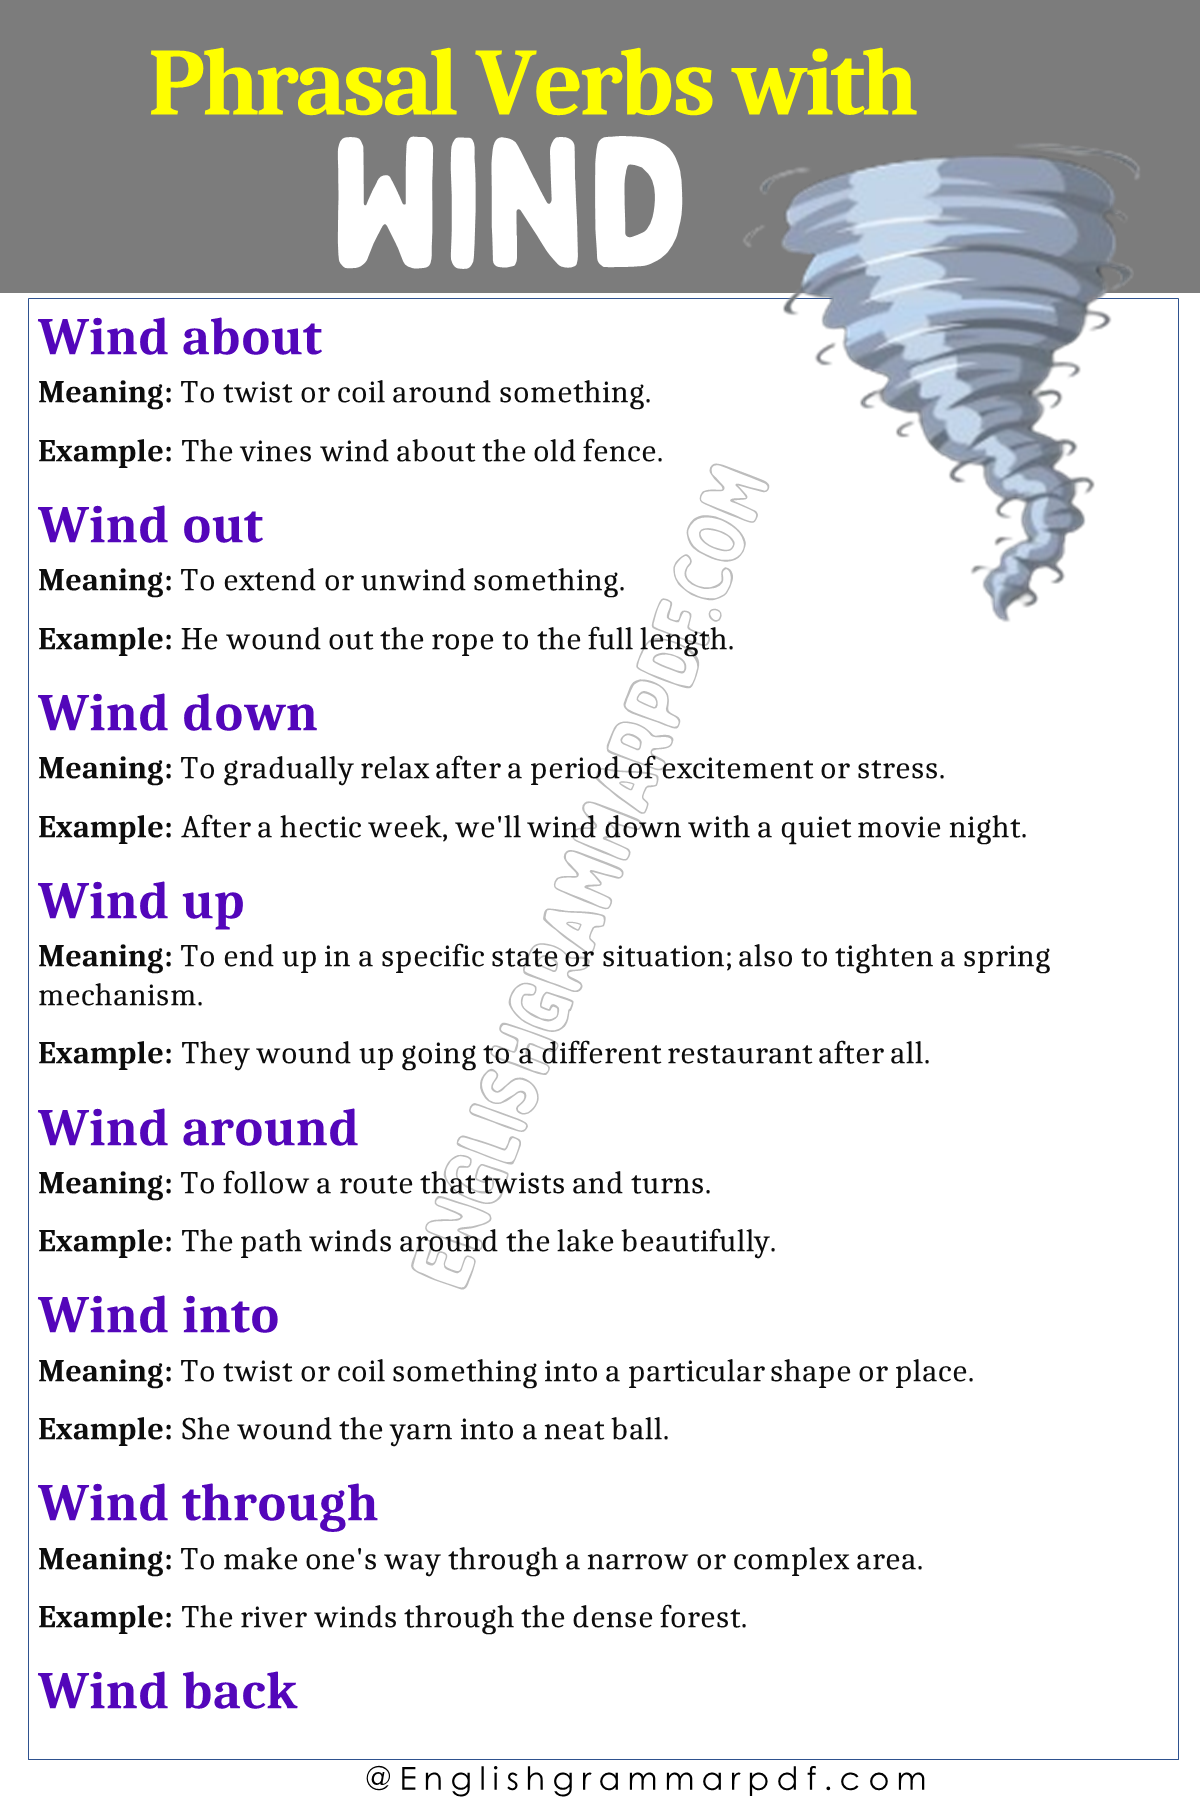 Phrasal Verbs with Wind